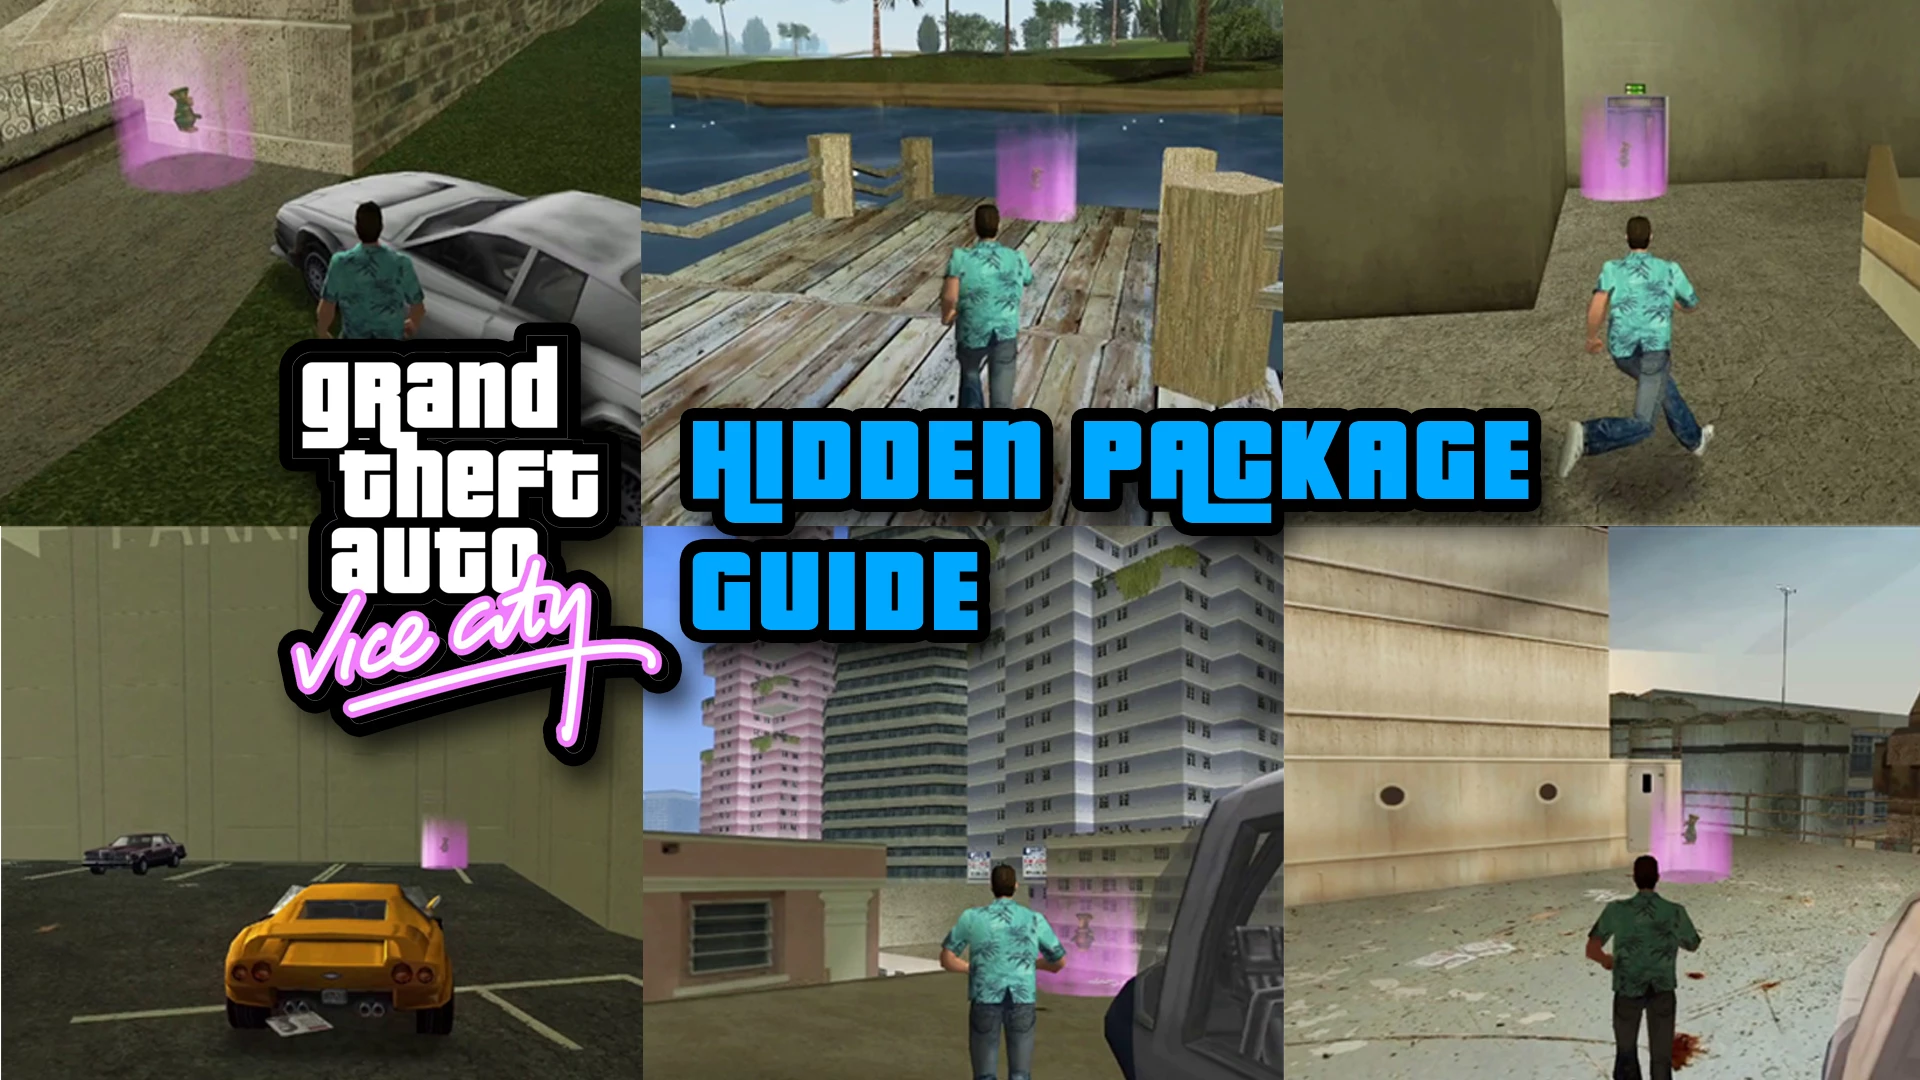 How To Install Cleo Cheats In Gta Vice City Android in 2023